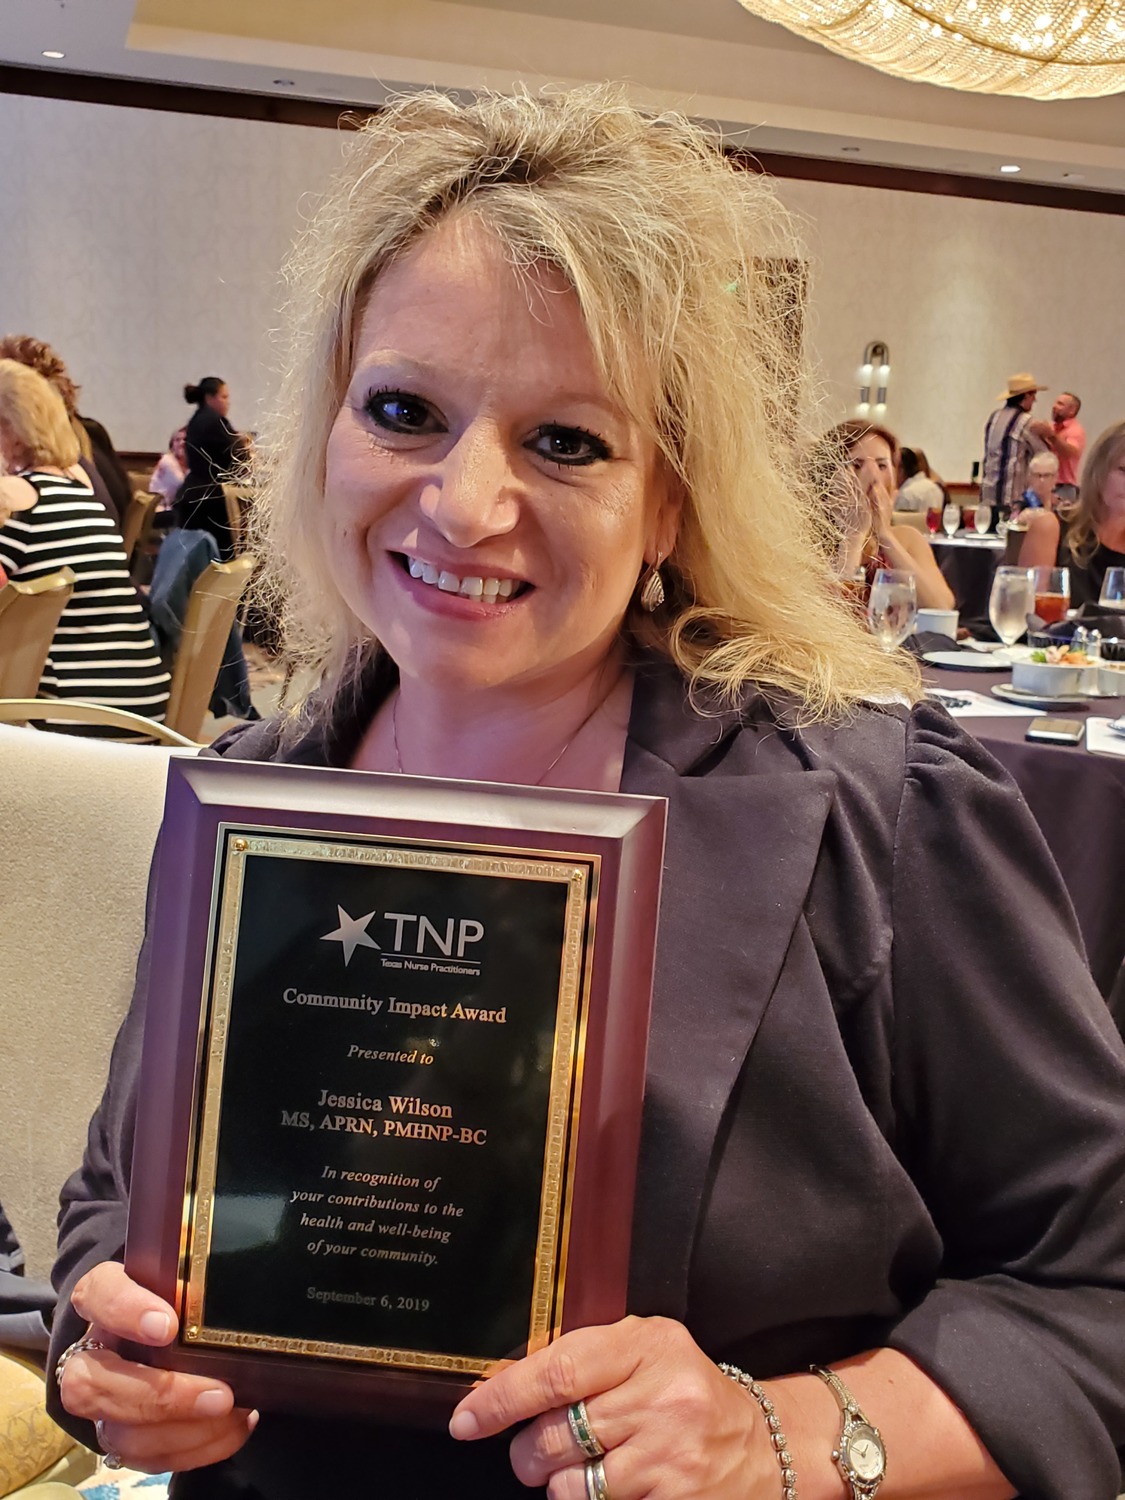 Gallery Photo of Recipient of Community Impact Award, Texas Nurse Practitioners, 2019